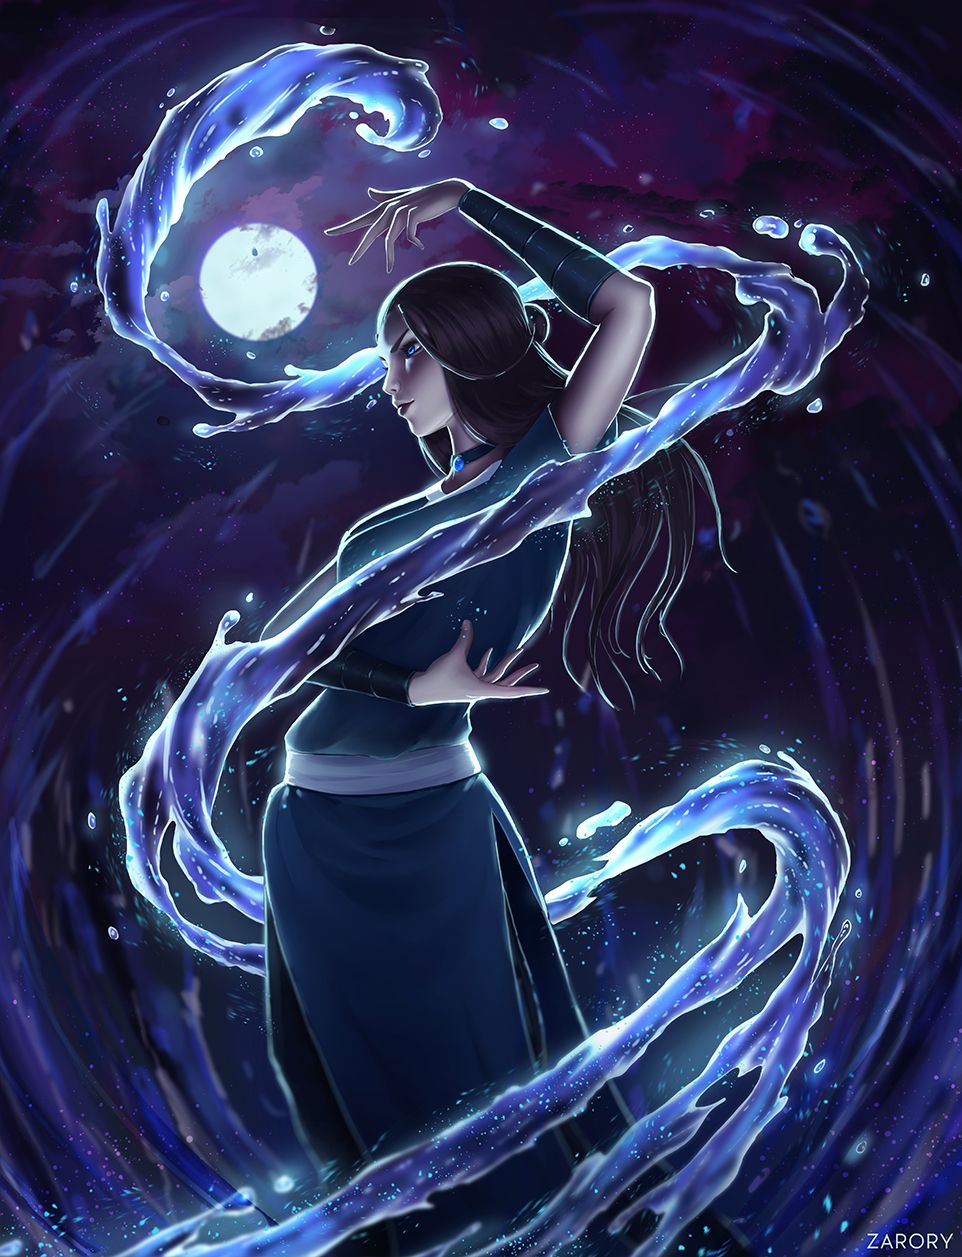 Avatar The Last Airbender 10 Katara Fan Art Pictures That You Need To See